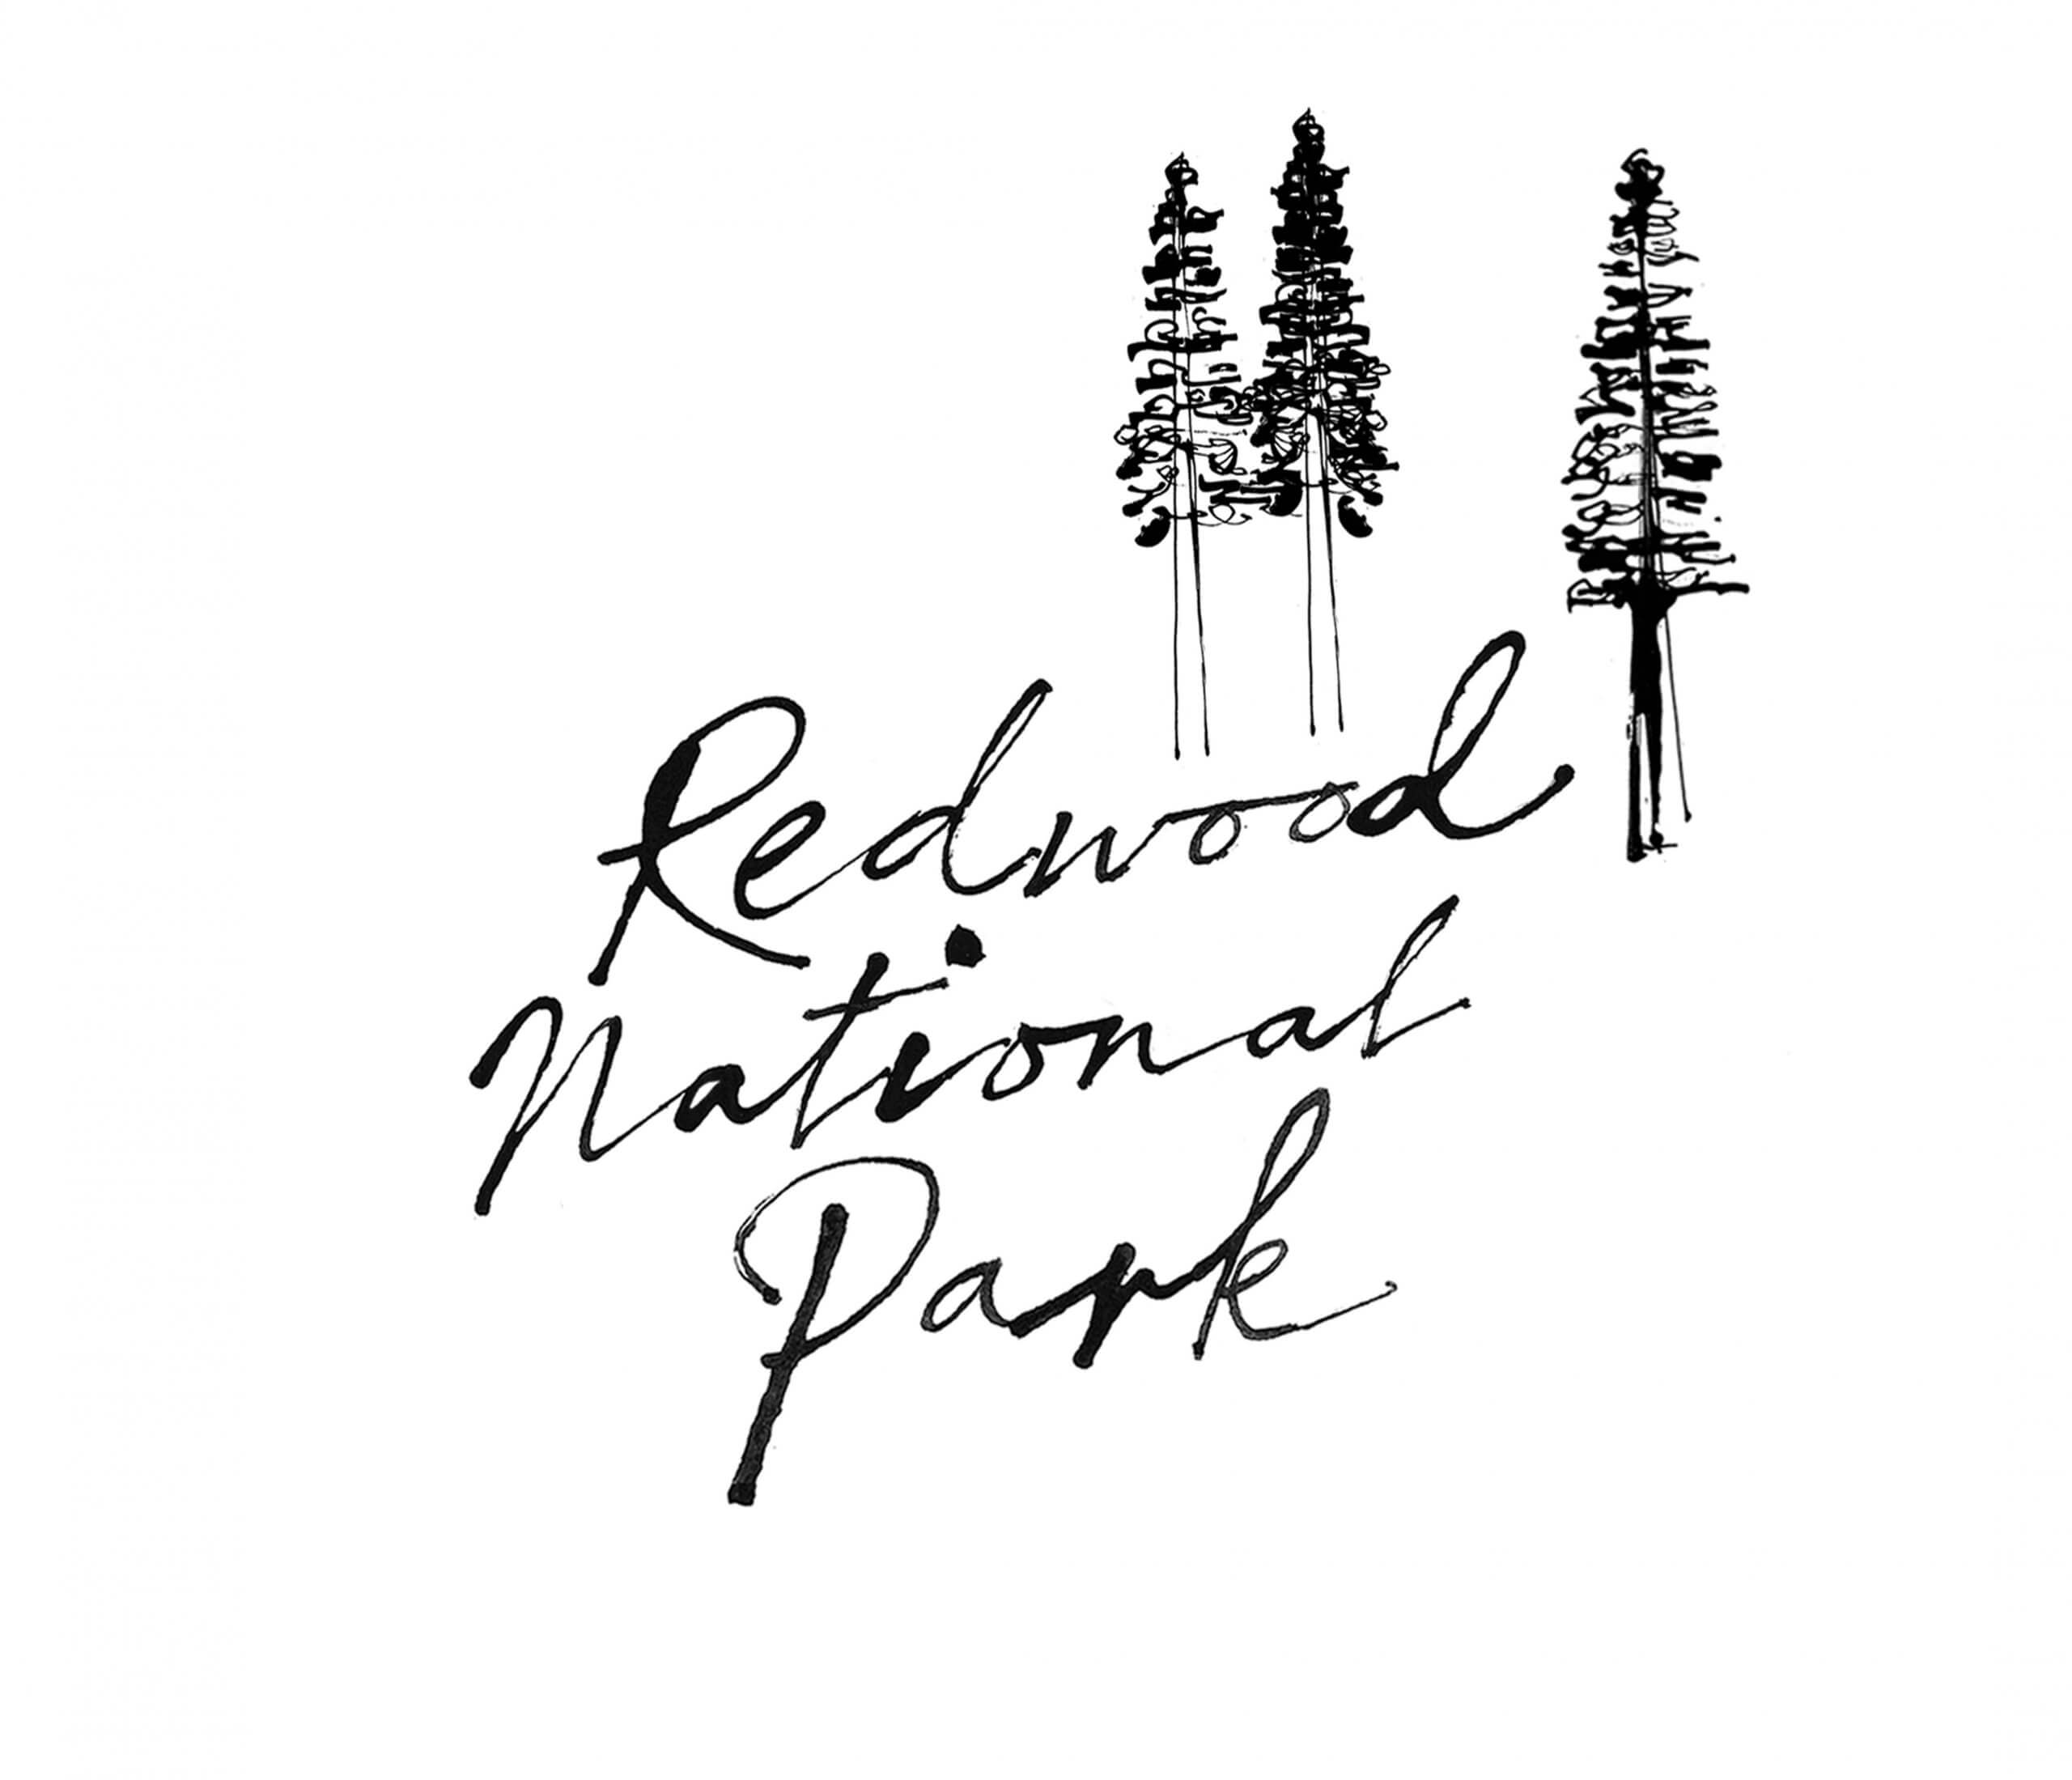 illustration and lettering for Californias famous Redwood National park, park of hand drawn illustrated map of the State of California.